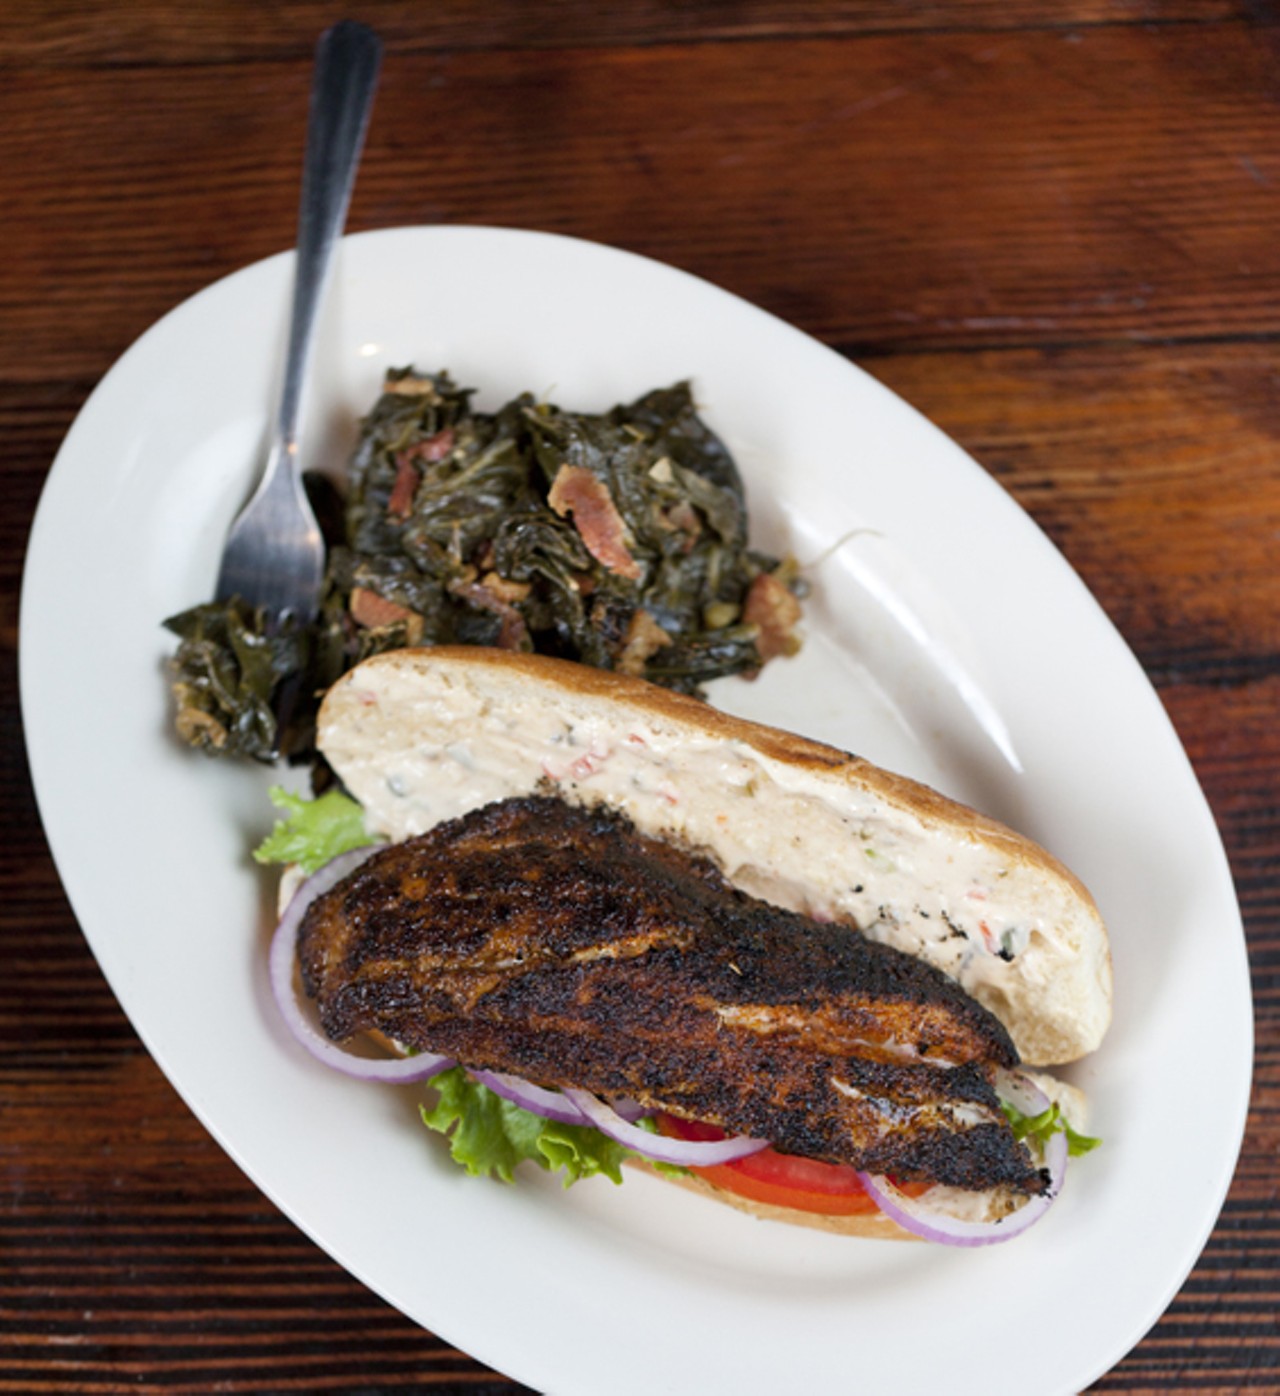 The Grouper Sandwich can be served grilled, fried or blackened - with lettuce, tomato, onion, and remoulade. Shown here blackened with a side of collard greens made with bacon, onion, and garlic.